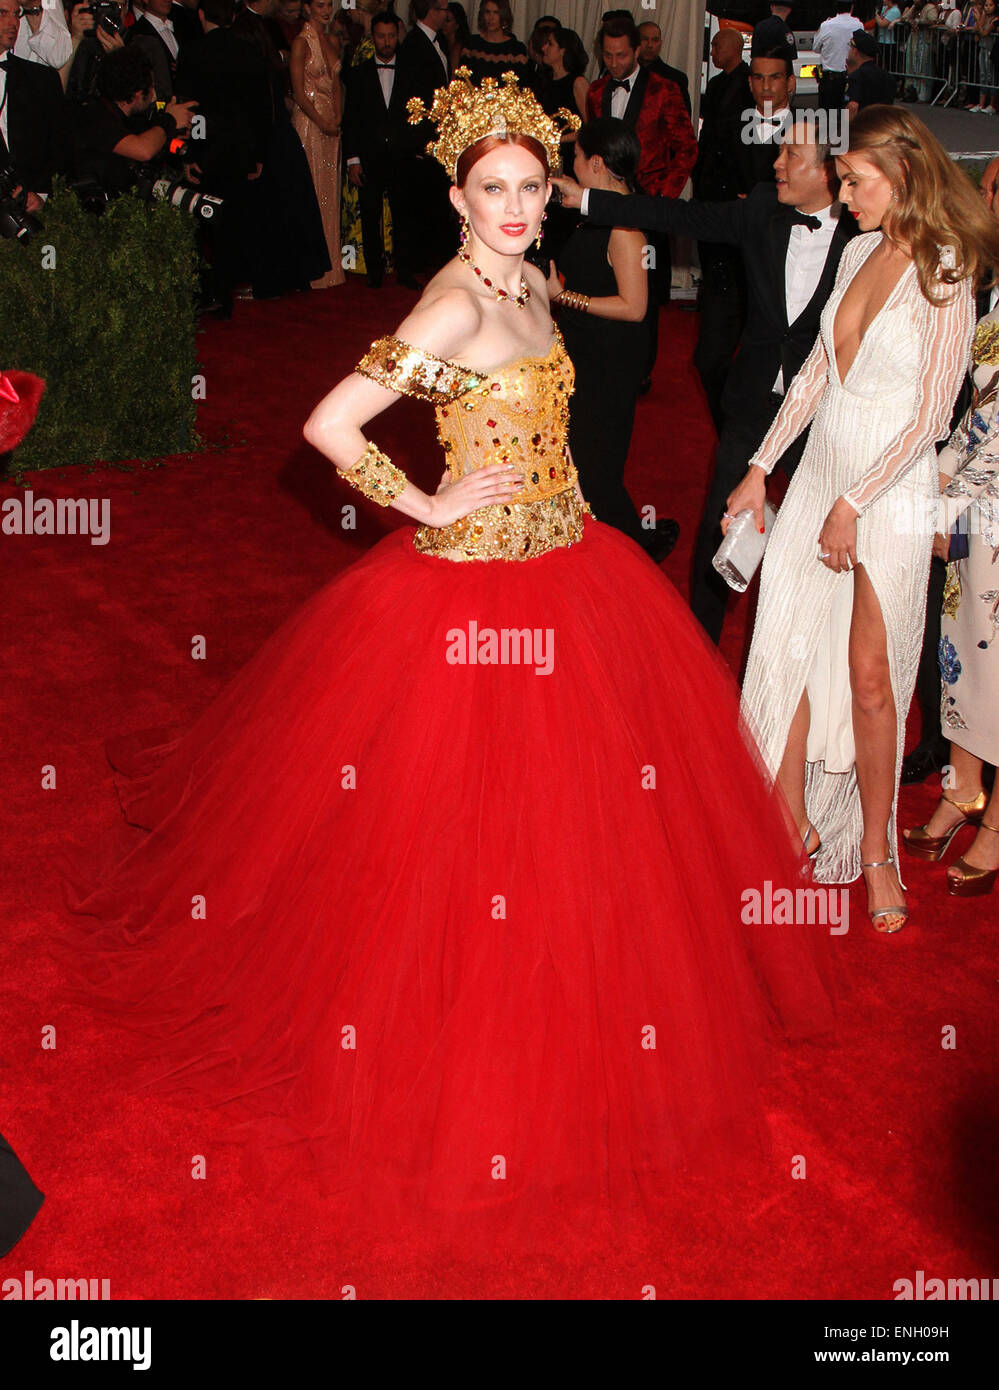 May 4, 2015 - New York,  U.S. - Model KAREN ELSON attends the Costume Institute Benefit gala celebrating the opening of the new exhibit of 'China: Through the Looking Glass' held at the Metropolitan Museum of Art. (Credit Image: © Nancy Kaszerman/ZUMAPRESS.com) Stock Photo